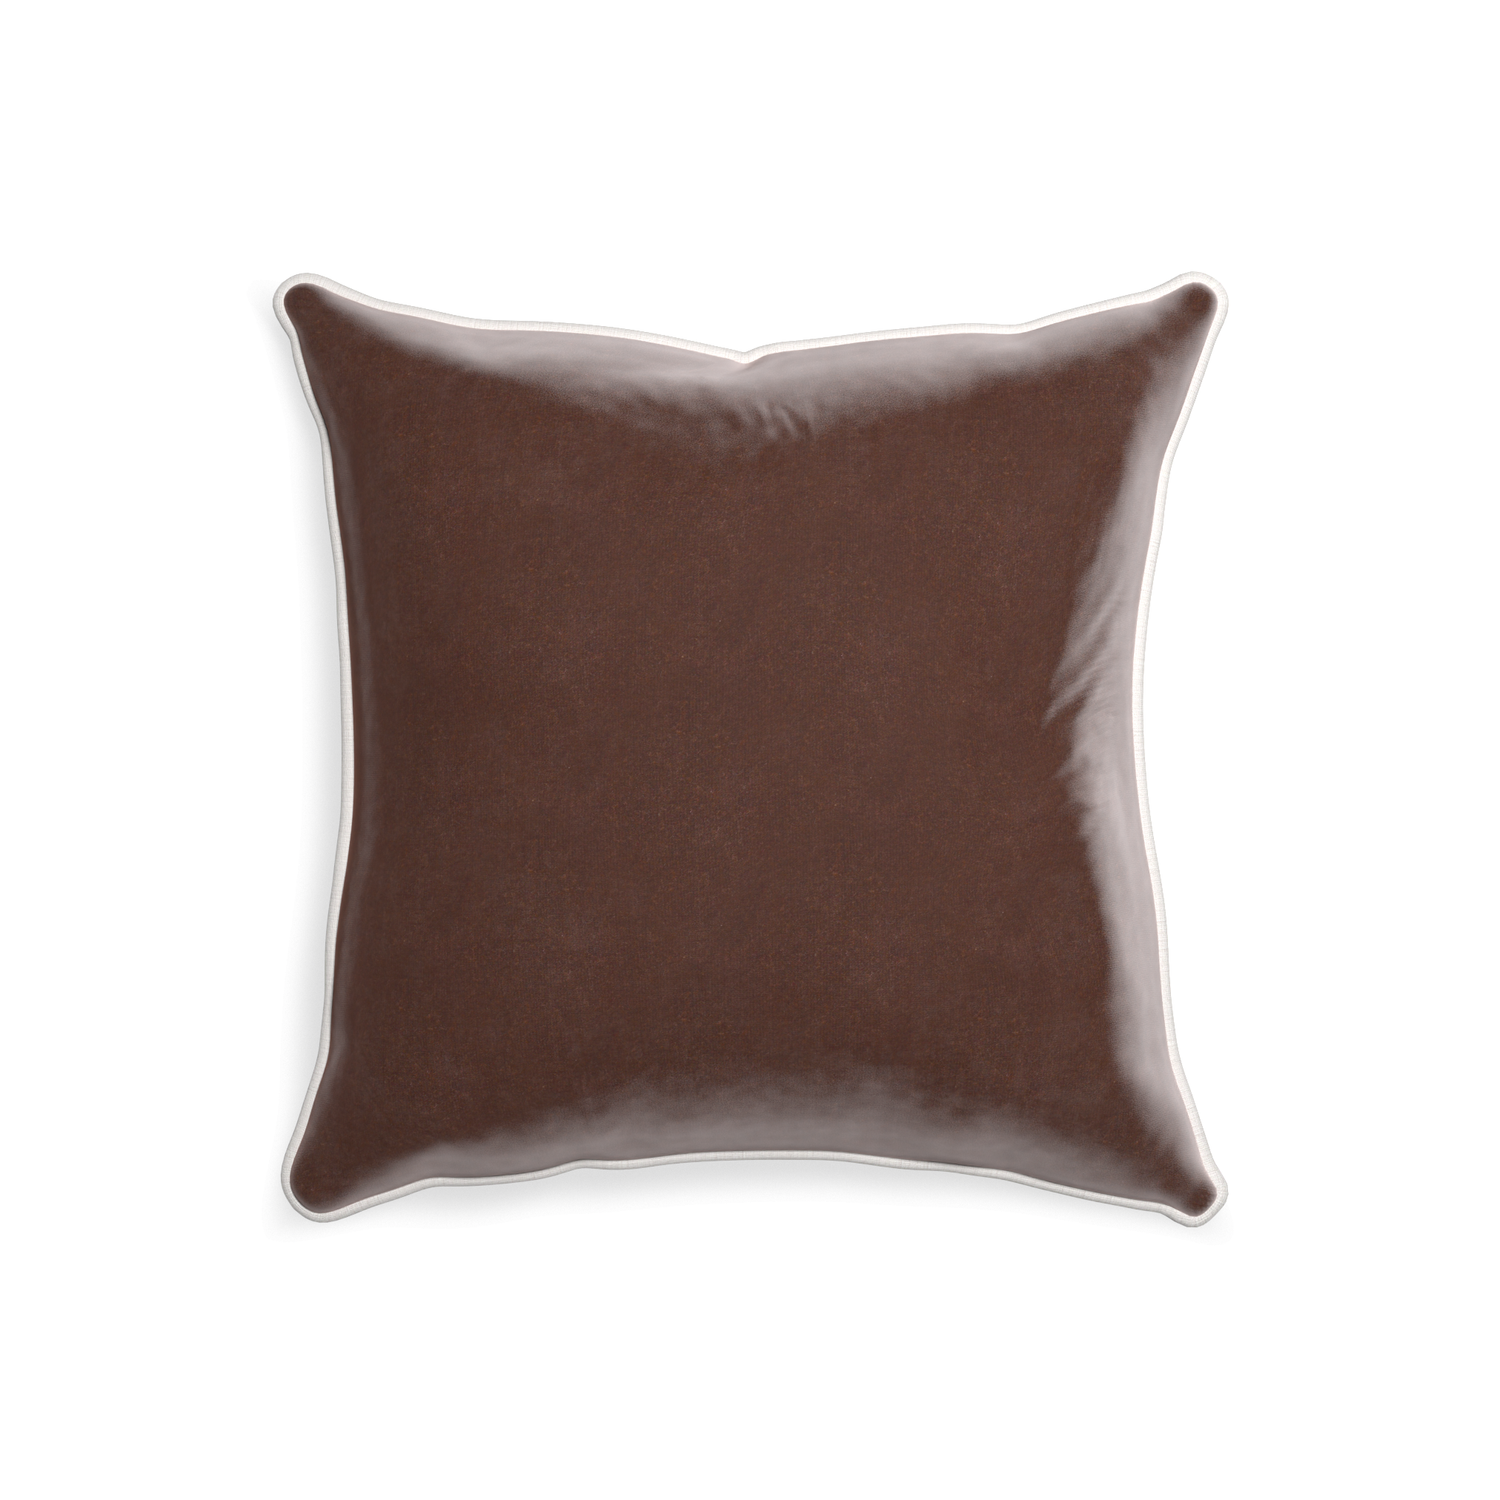 square brown velvet pillow with white piping